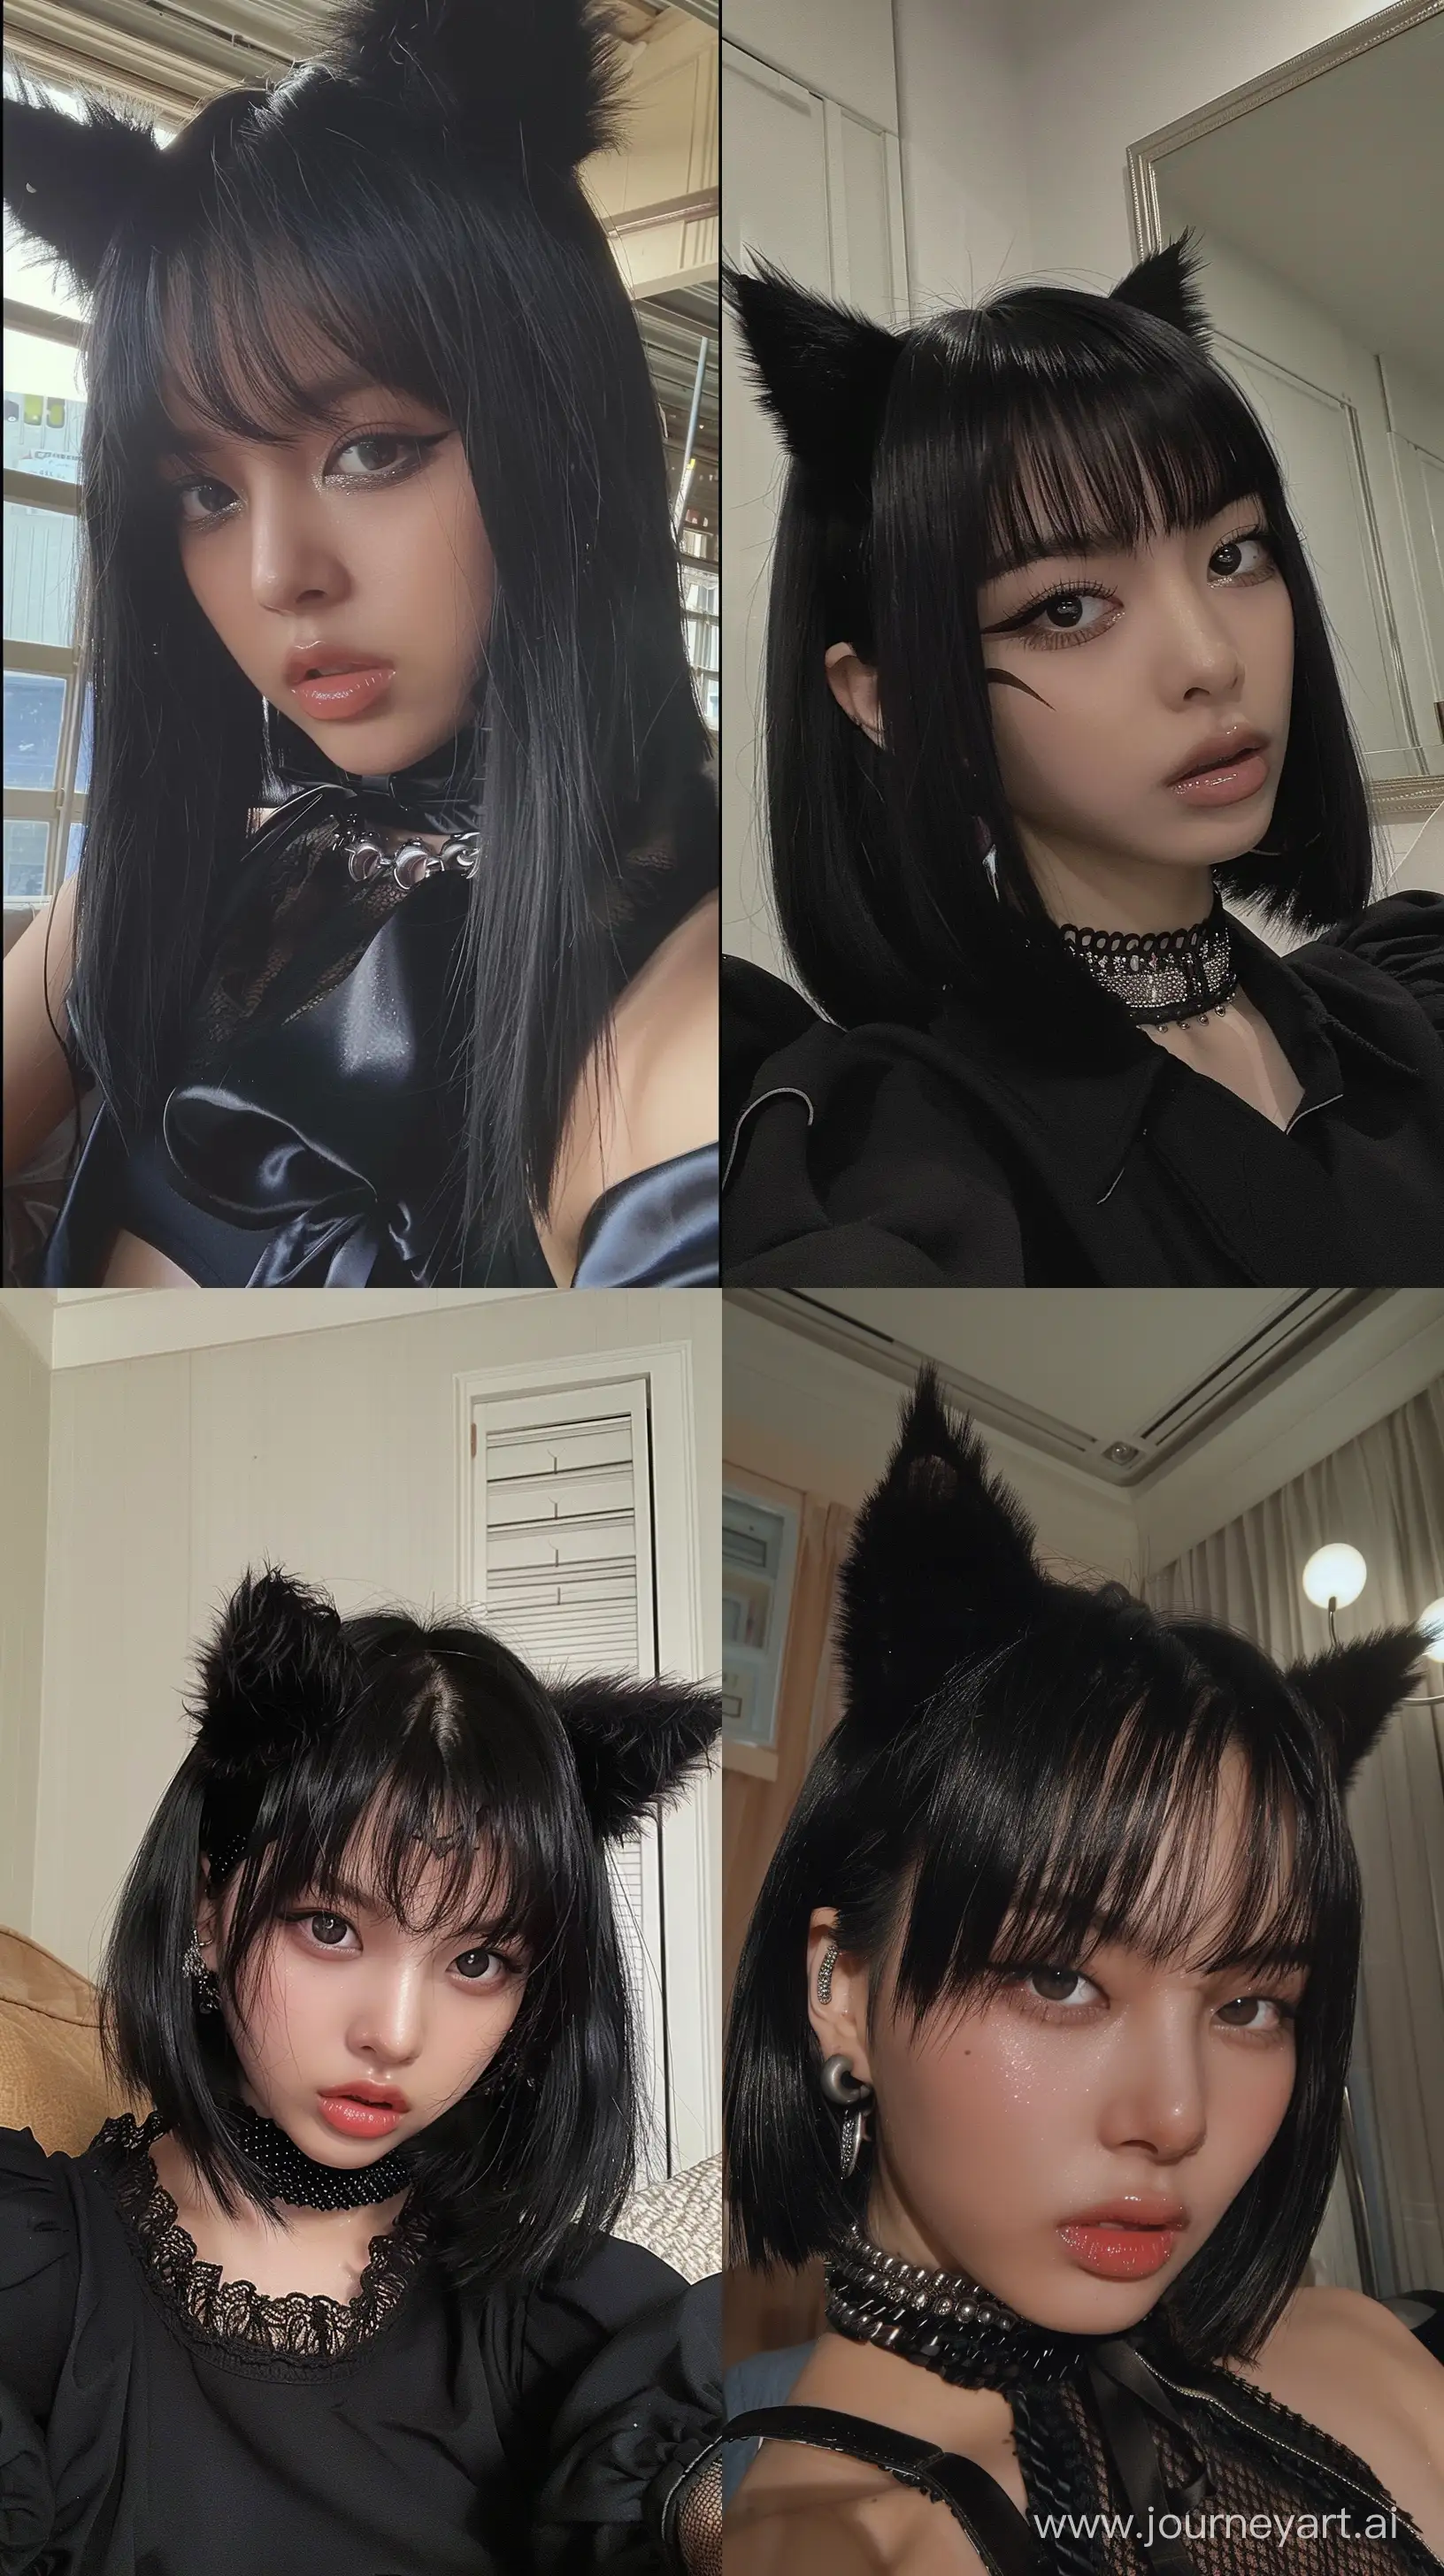 Blackpinks-Jennie-Selfie-with-Wolfcut-Hair-and-Aesthetic-Makeup